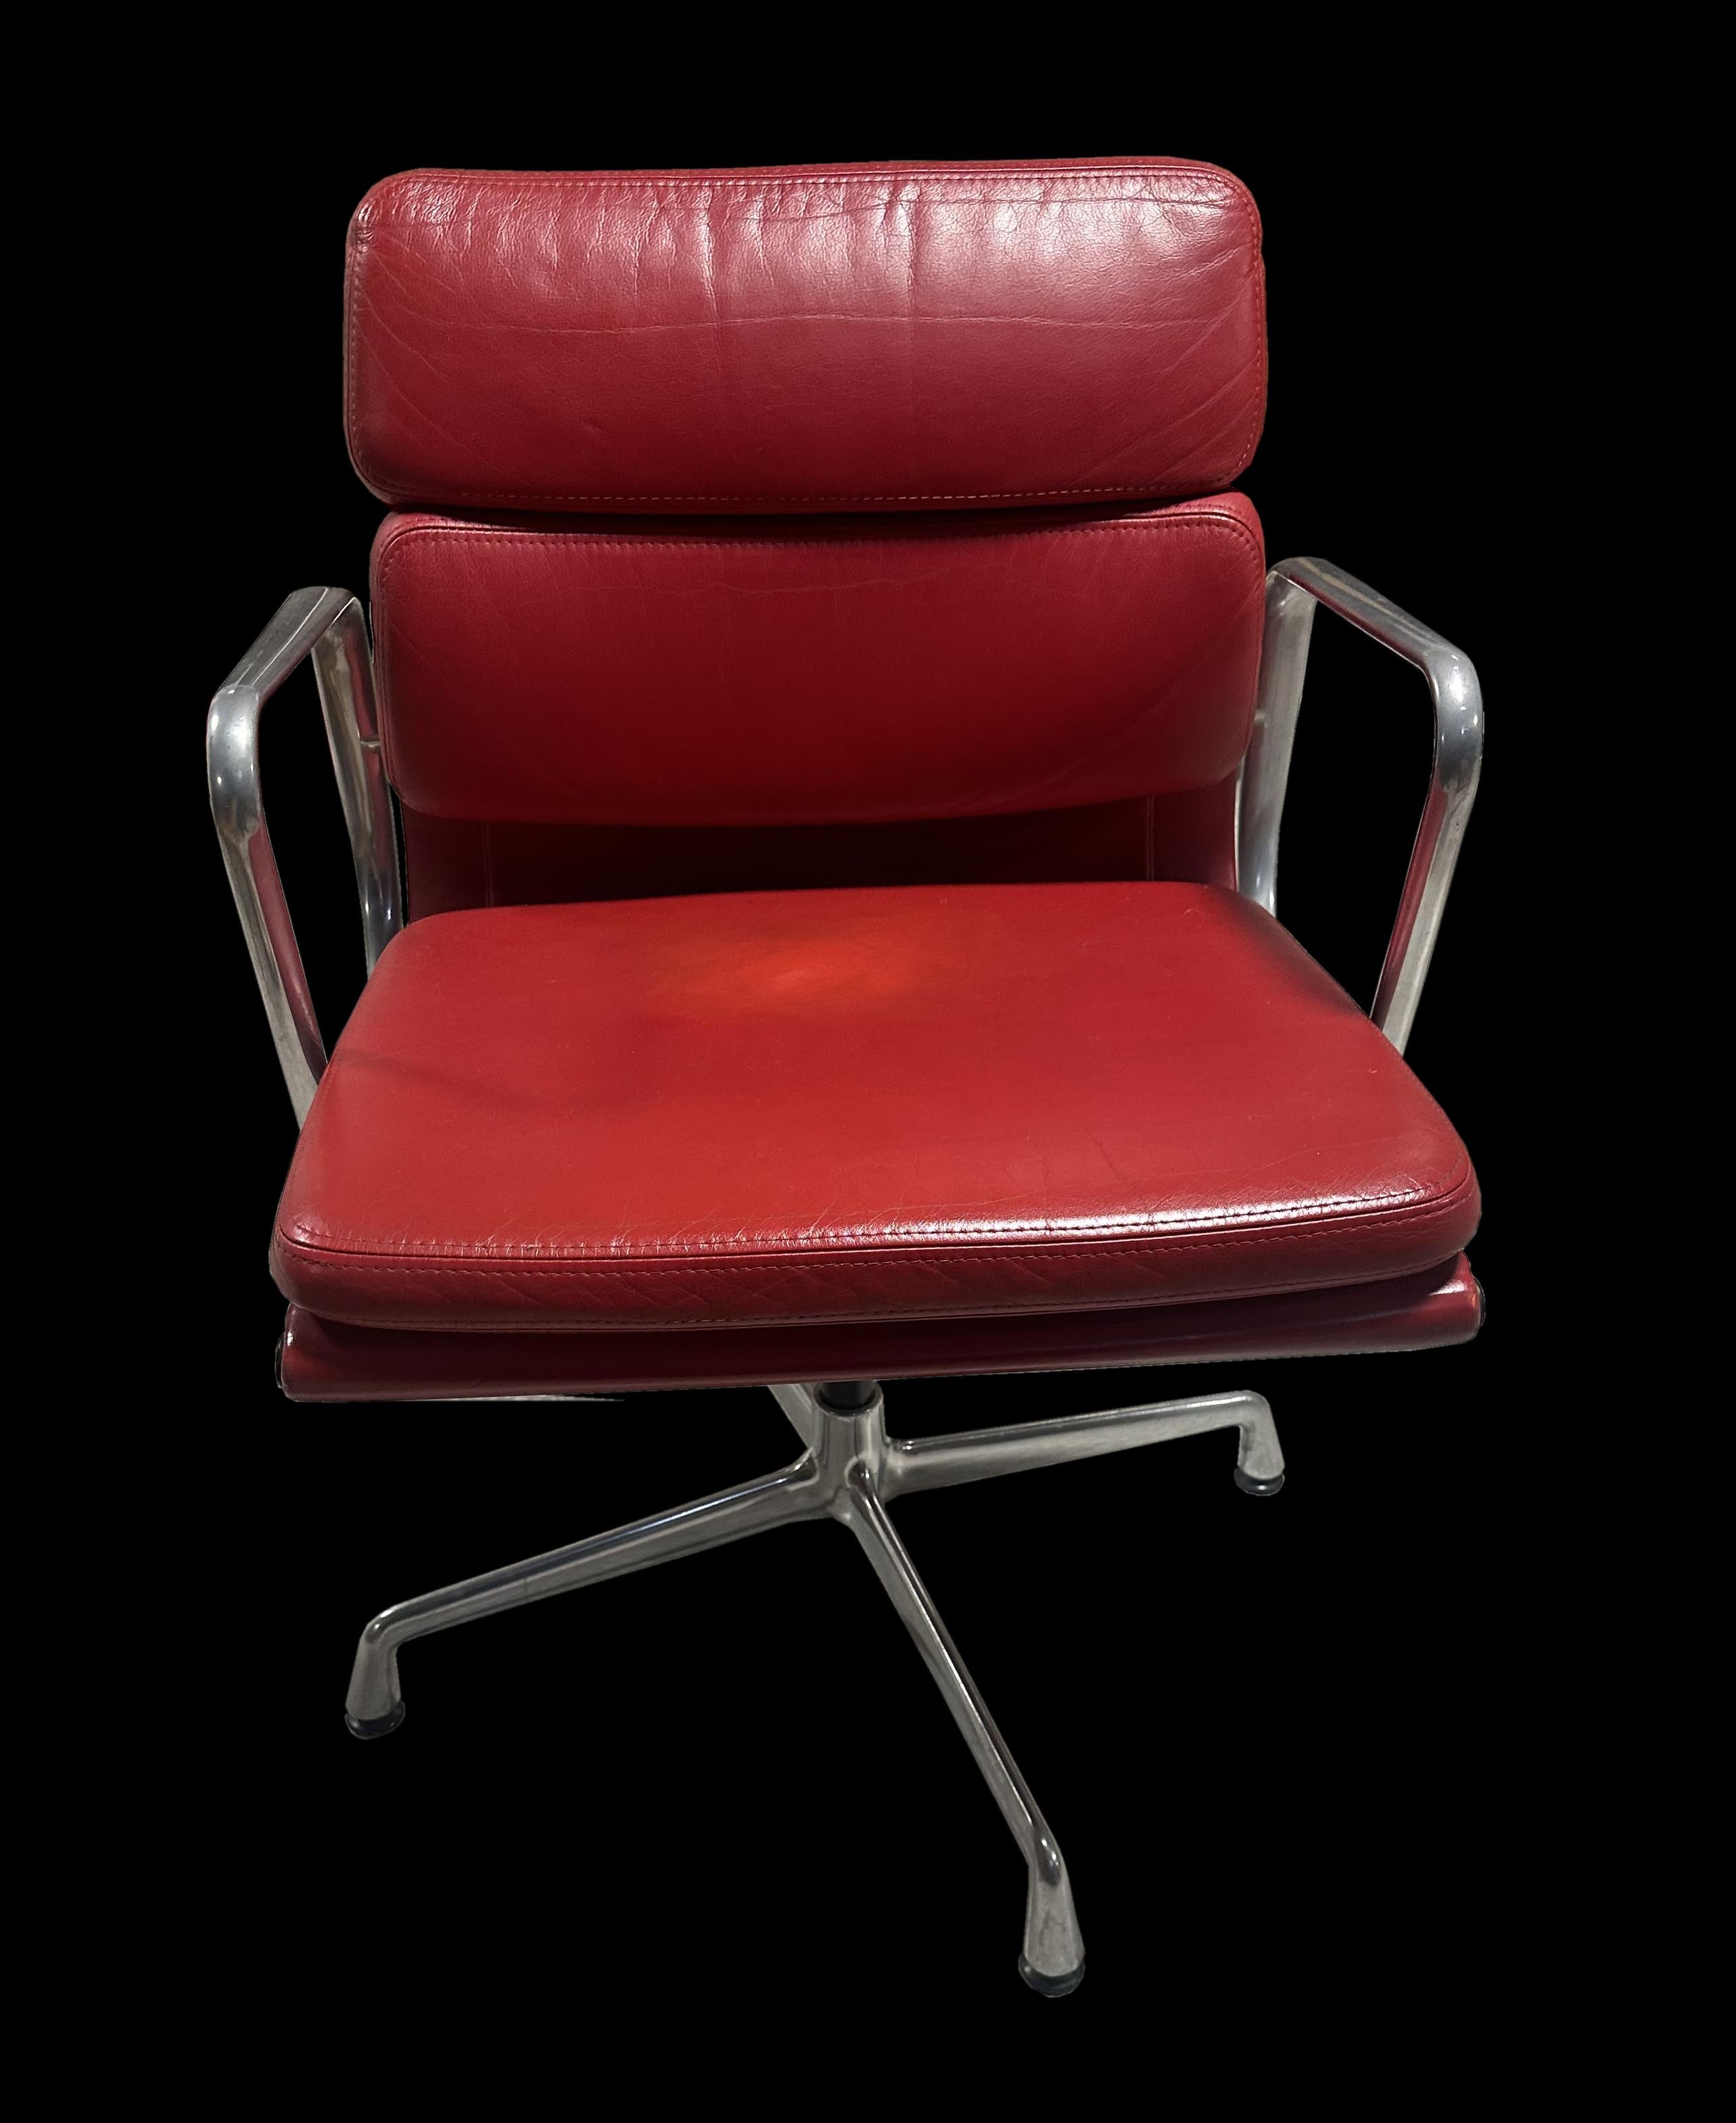 These are very nice leather examples of this model of Eames soft pad office chairs, they cost a small fortune new, and these look and feel nicer with a bit of patina on the Aluminium and leather but with no scuffs or tears.
We have three identical